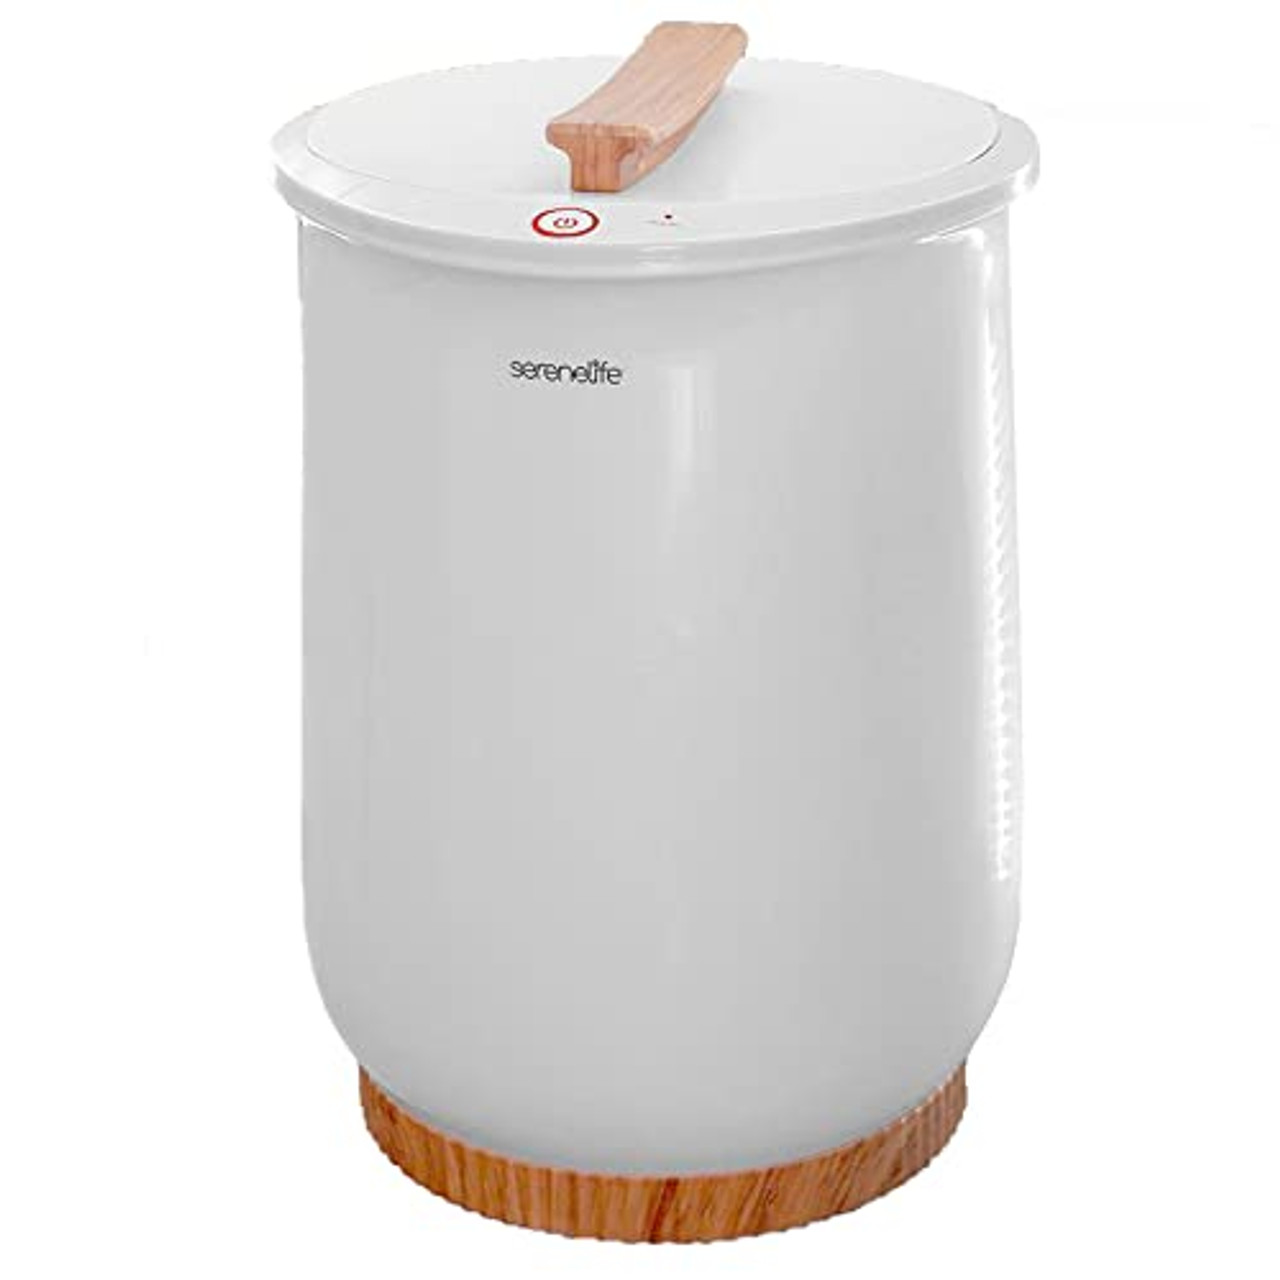 Bathroom bin with lid • Compare & see prices now »